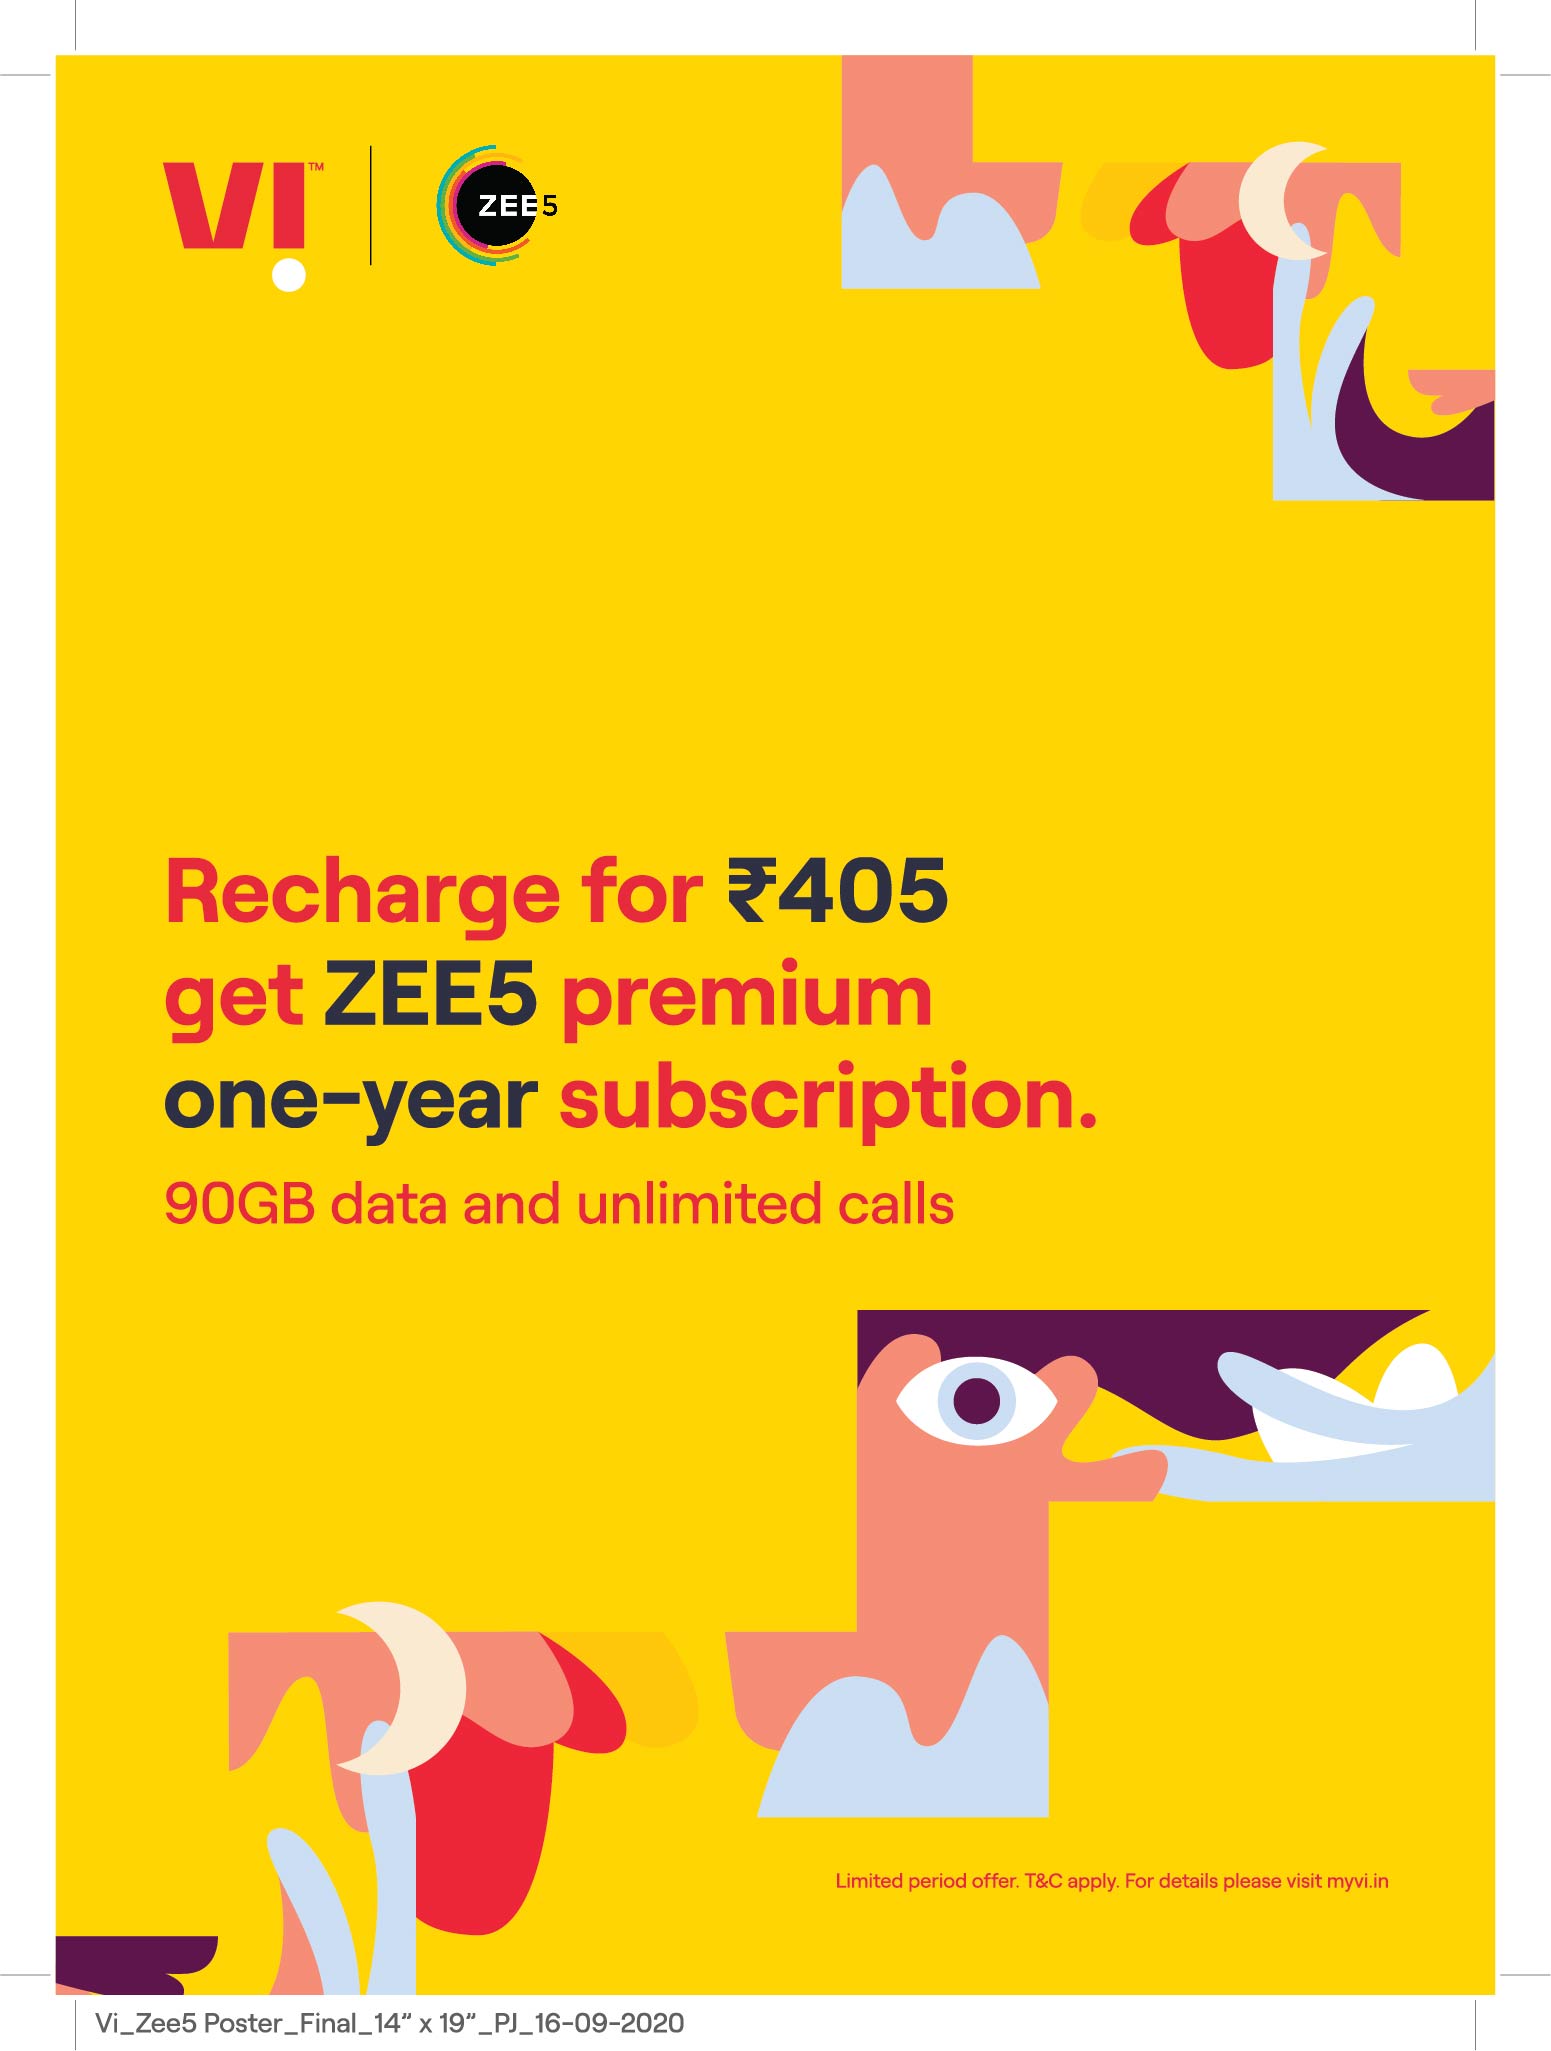 ZEE5 premium subscription EXCLUSIVELY for Vi customers with INR 405 Recharge